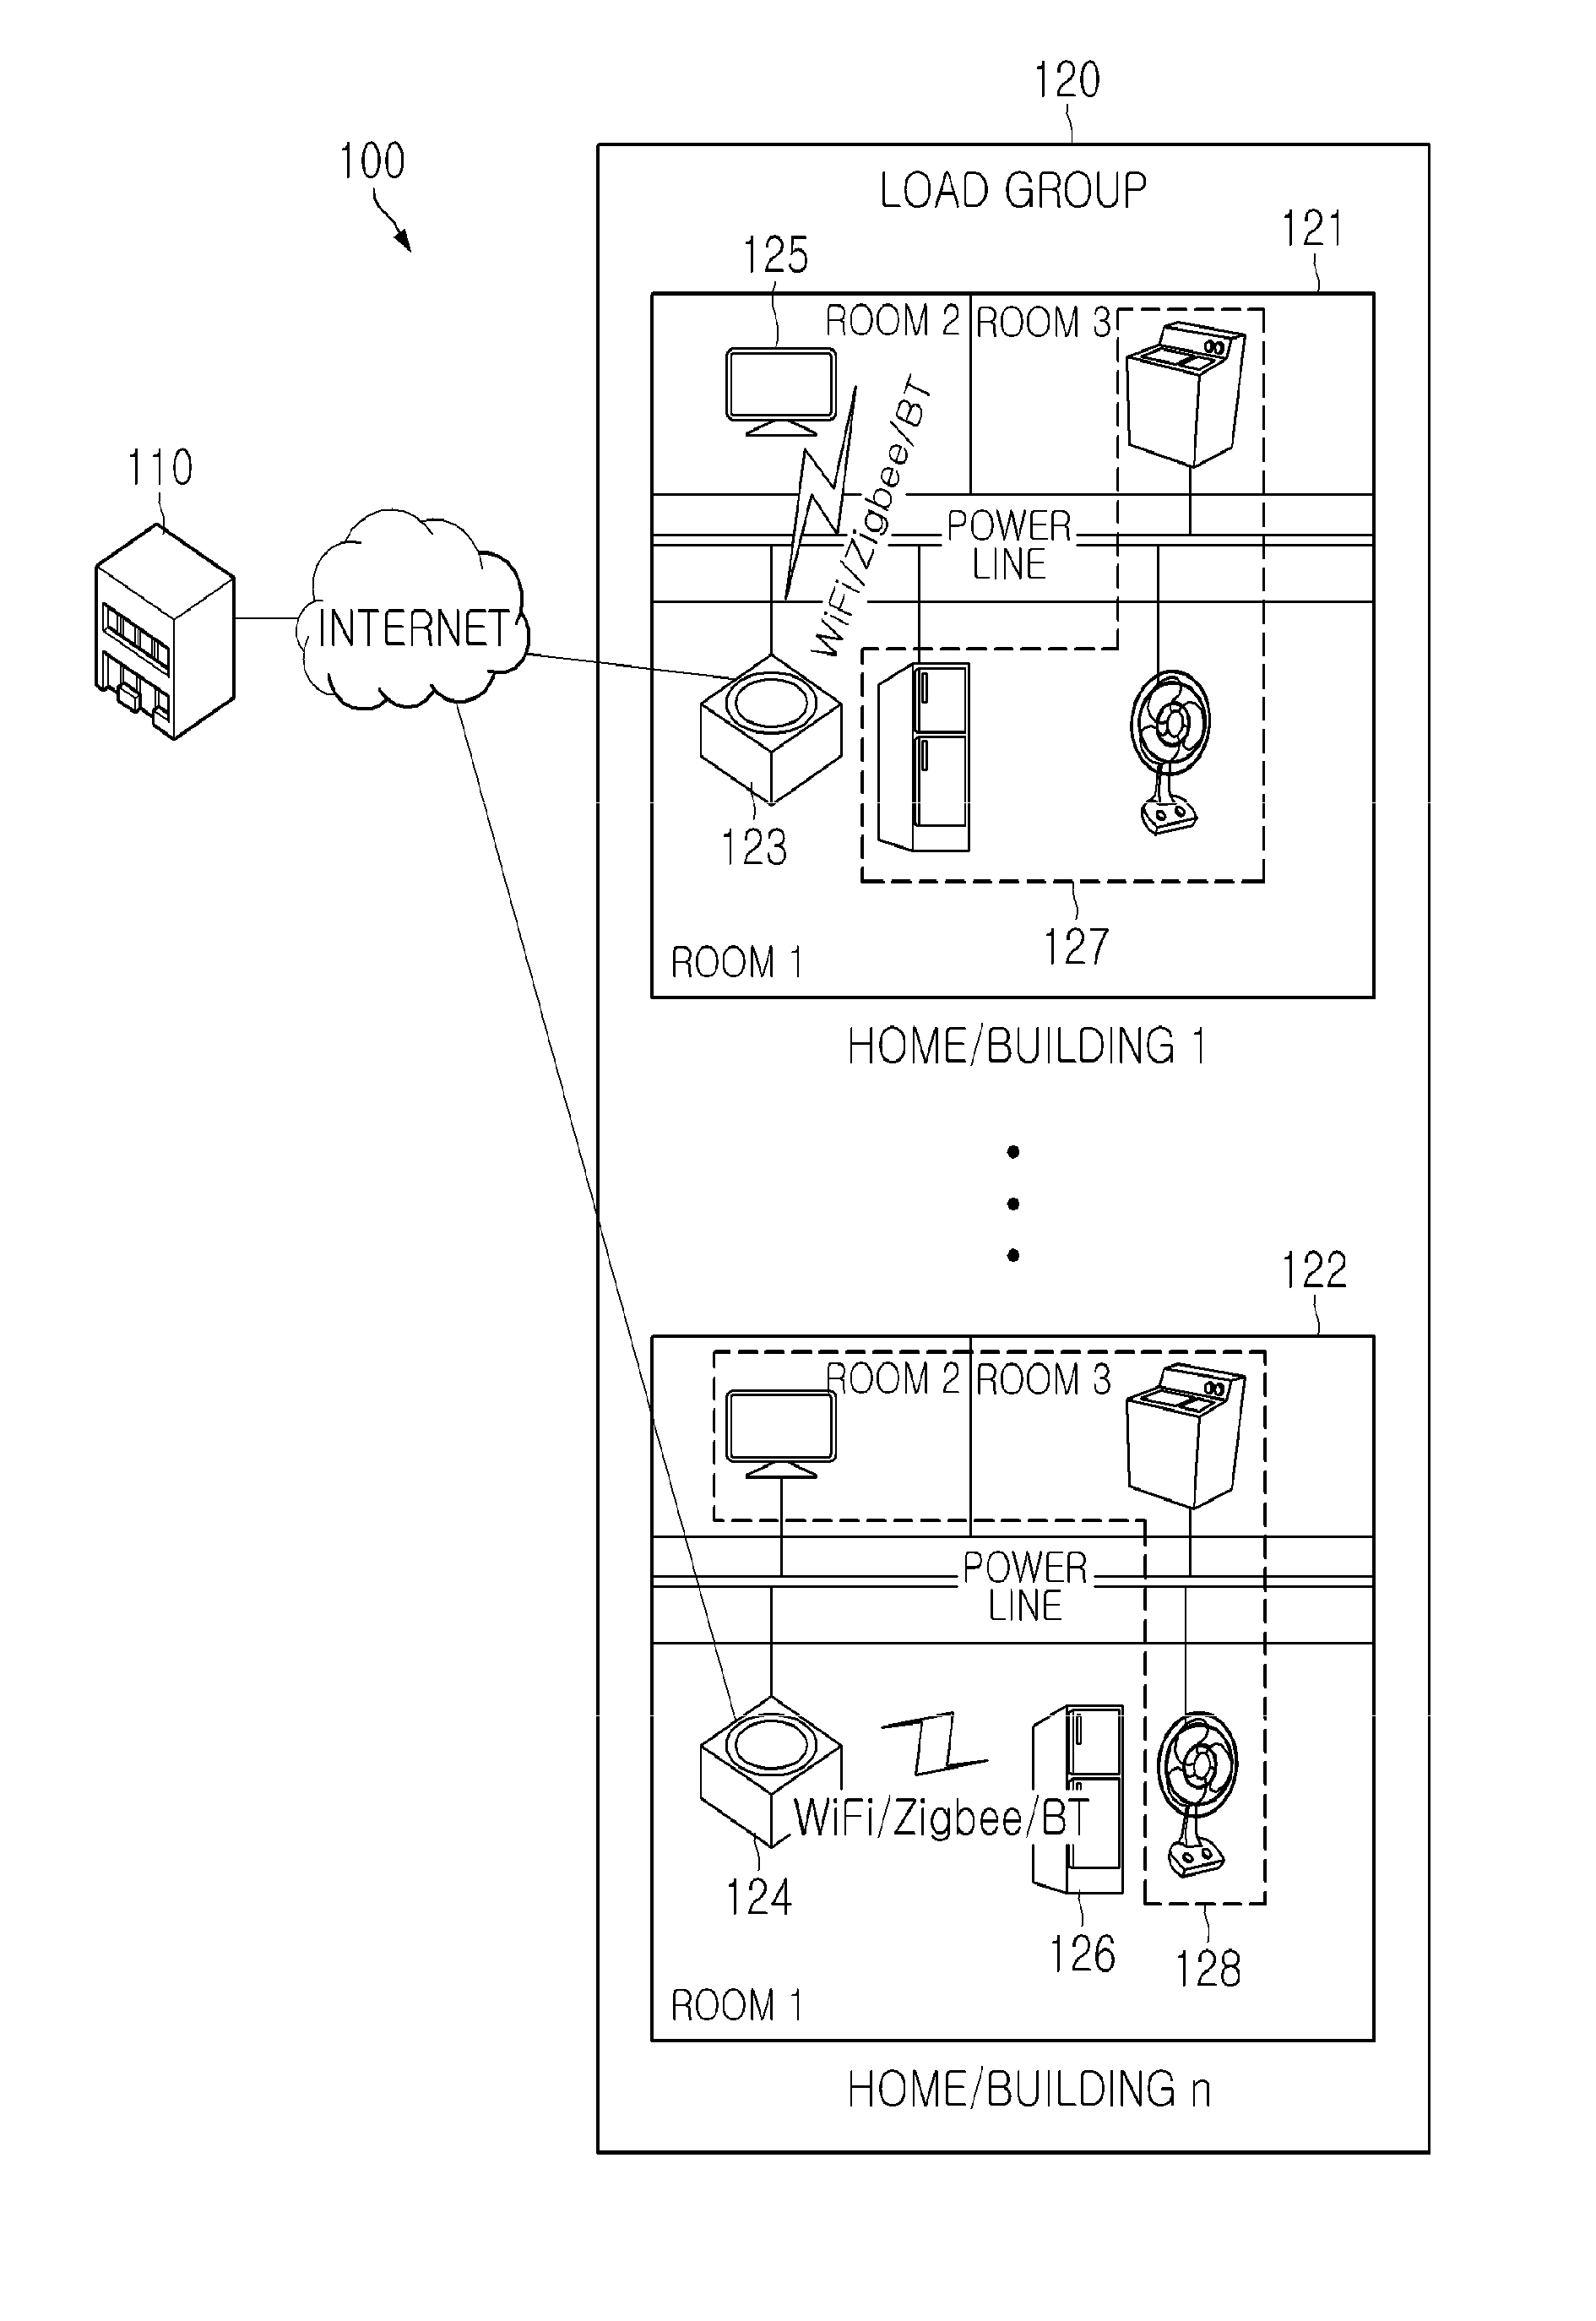 Method and system for power control of electrical devices using maximum power control algorithm